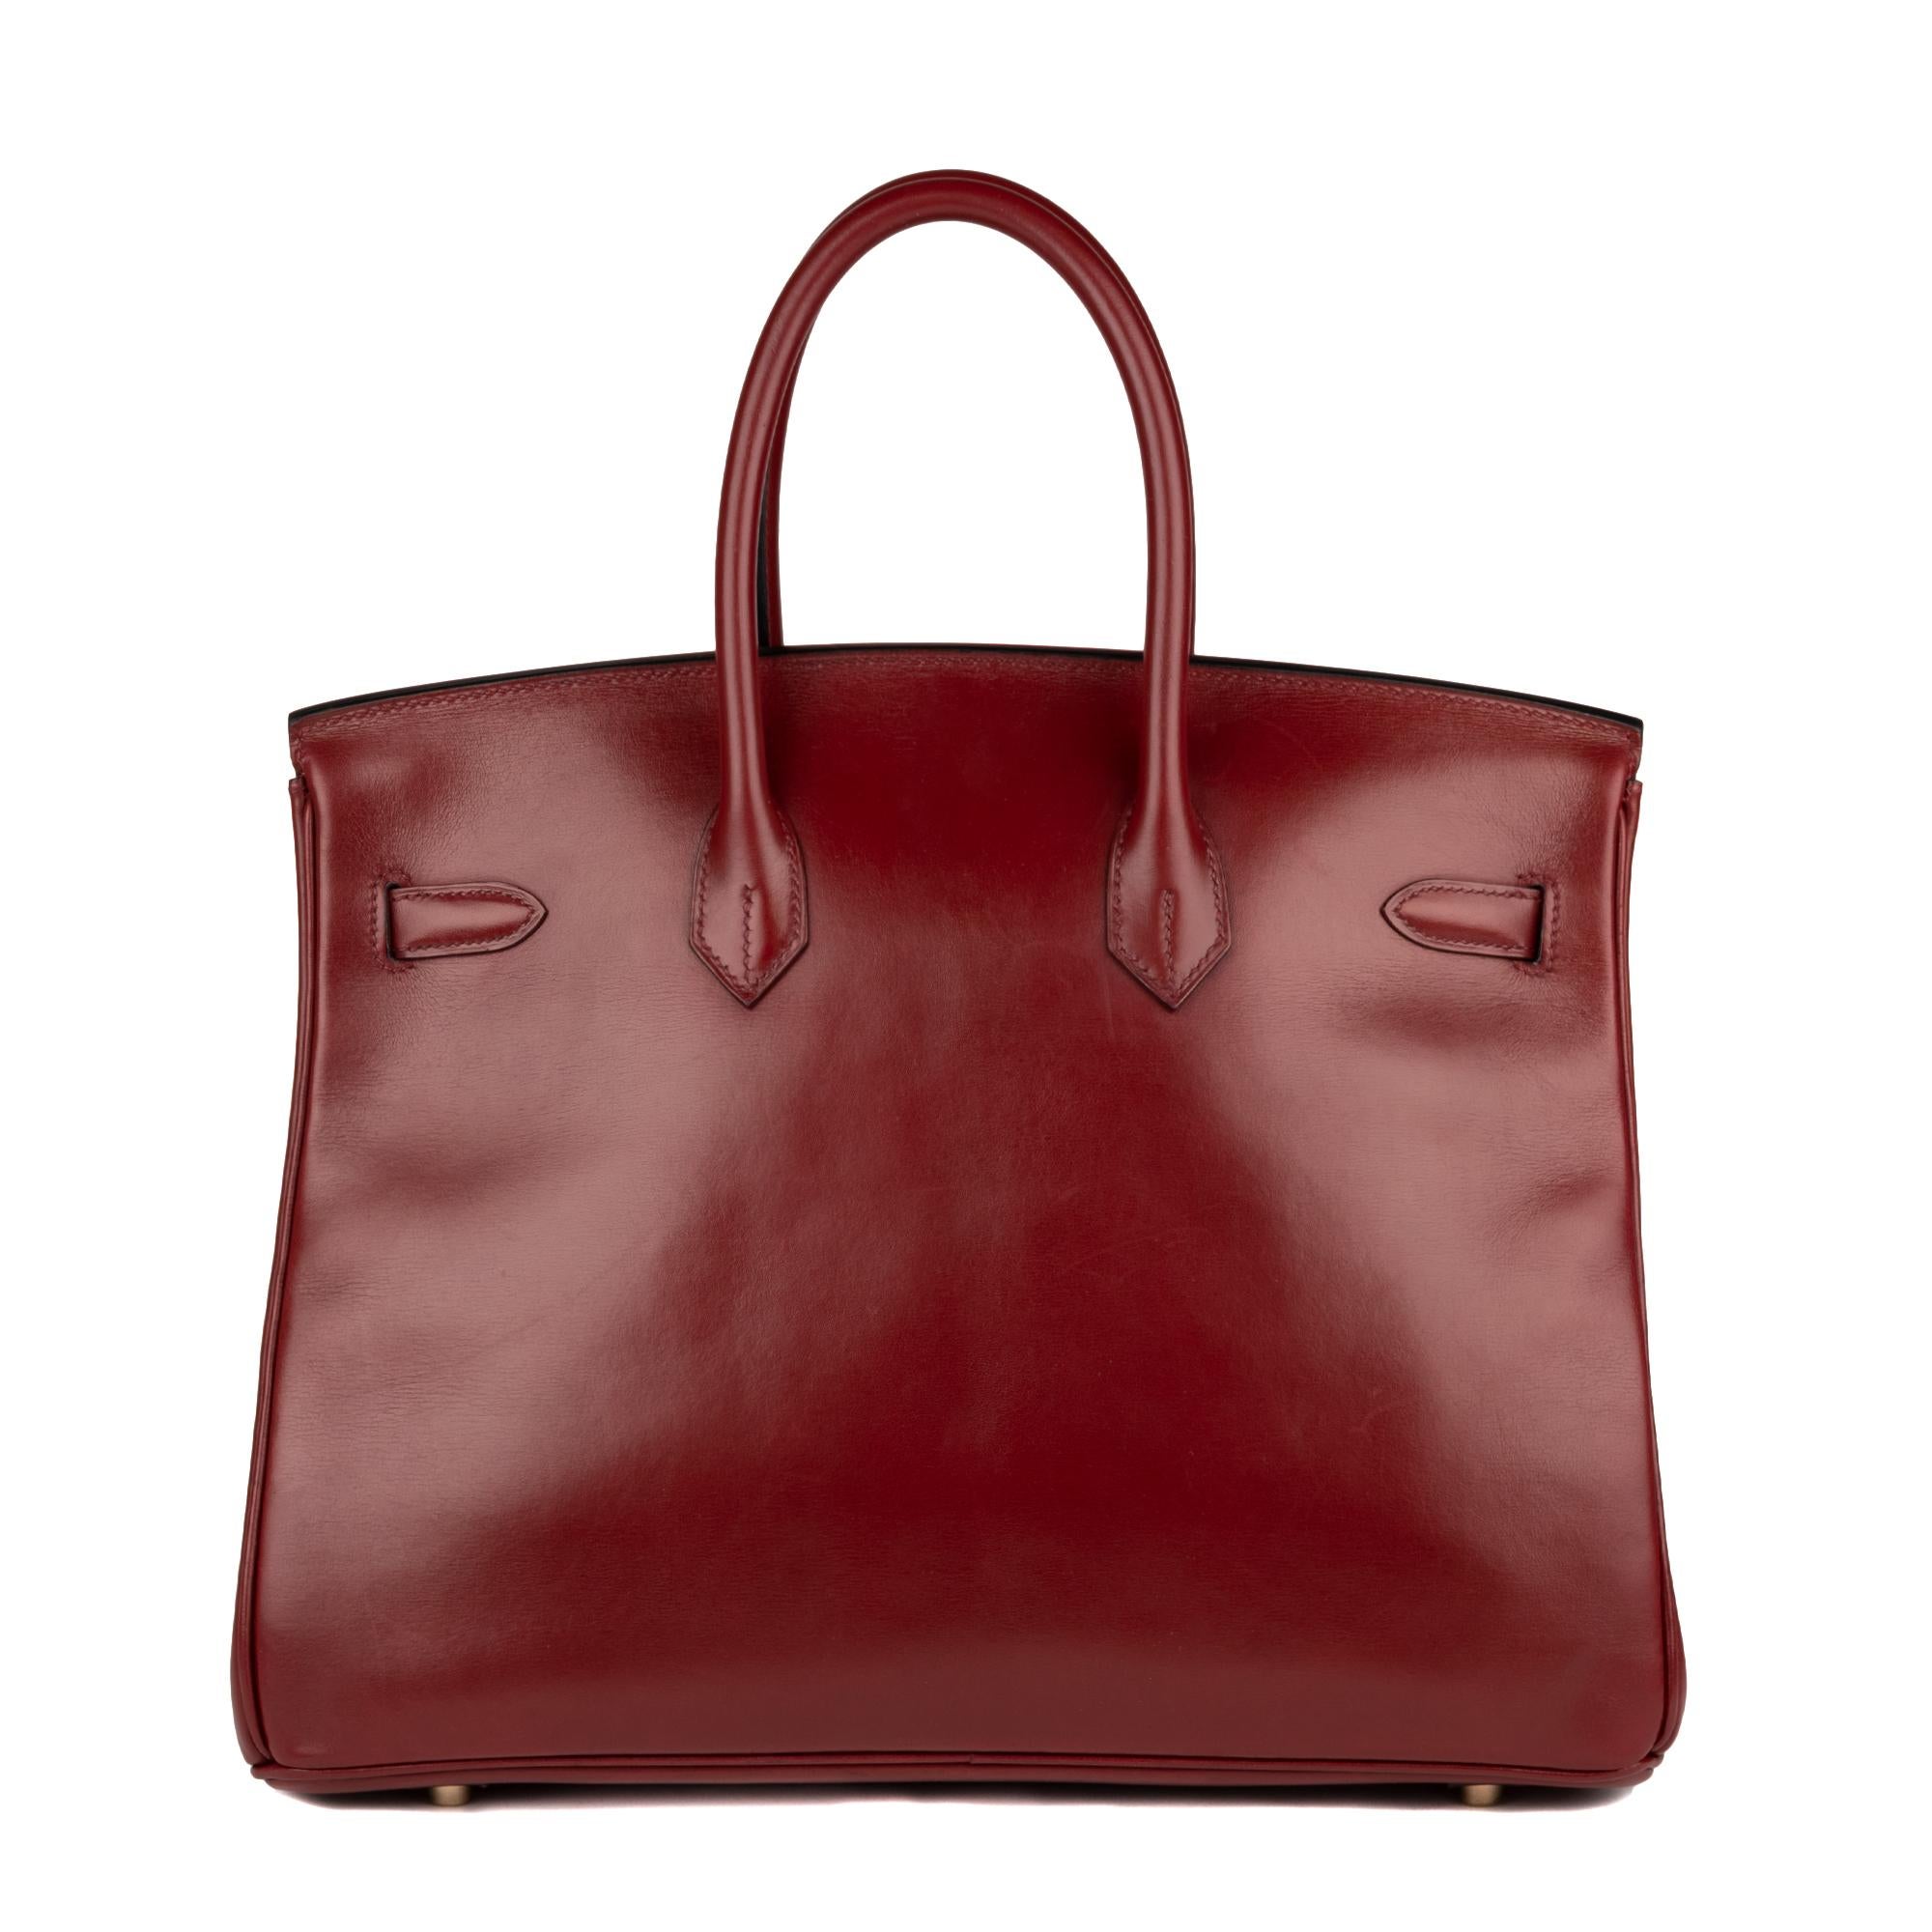 Exceptional Hermes Birkin bag 35 cm in burgundy box leather, gold plated metal hardware, double handle in burgundy leather allowing a hand carried.  Flap closure.  Inner lining in burgundy leather, one zipped pocket, one patch pocket.  
Sold with